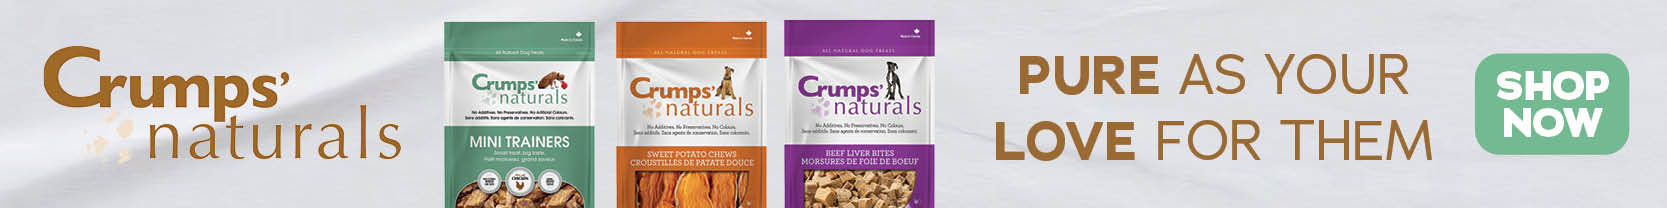 Crumps' naturals - pure as your love for them